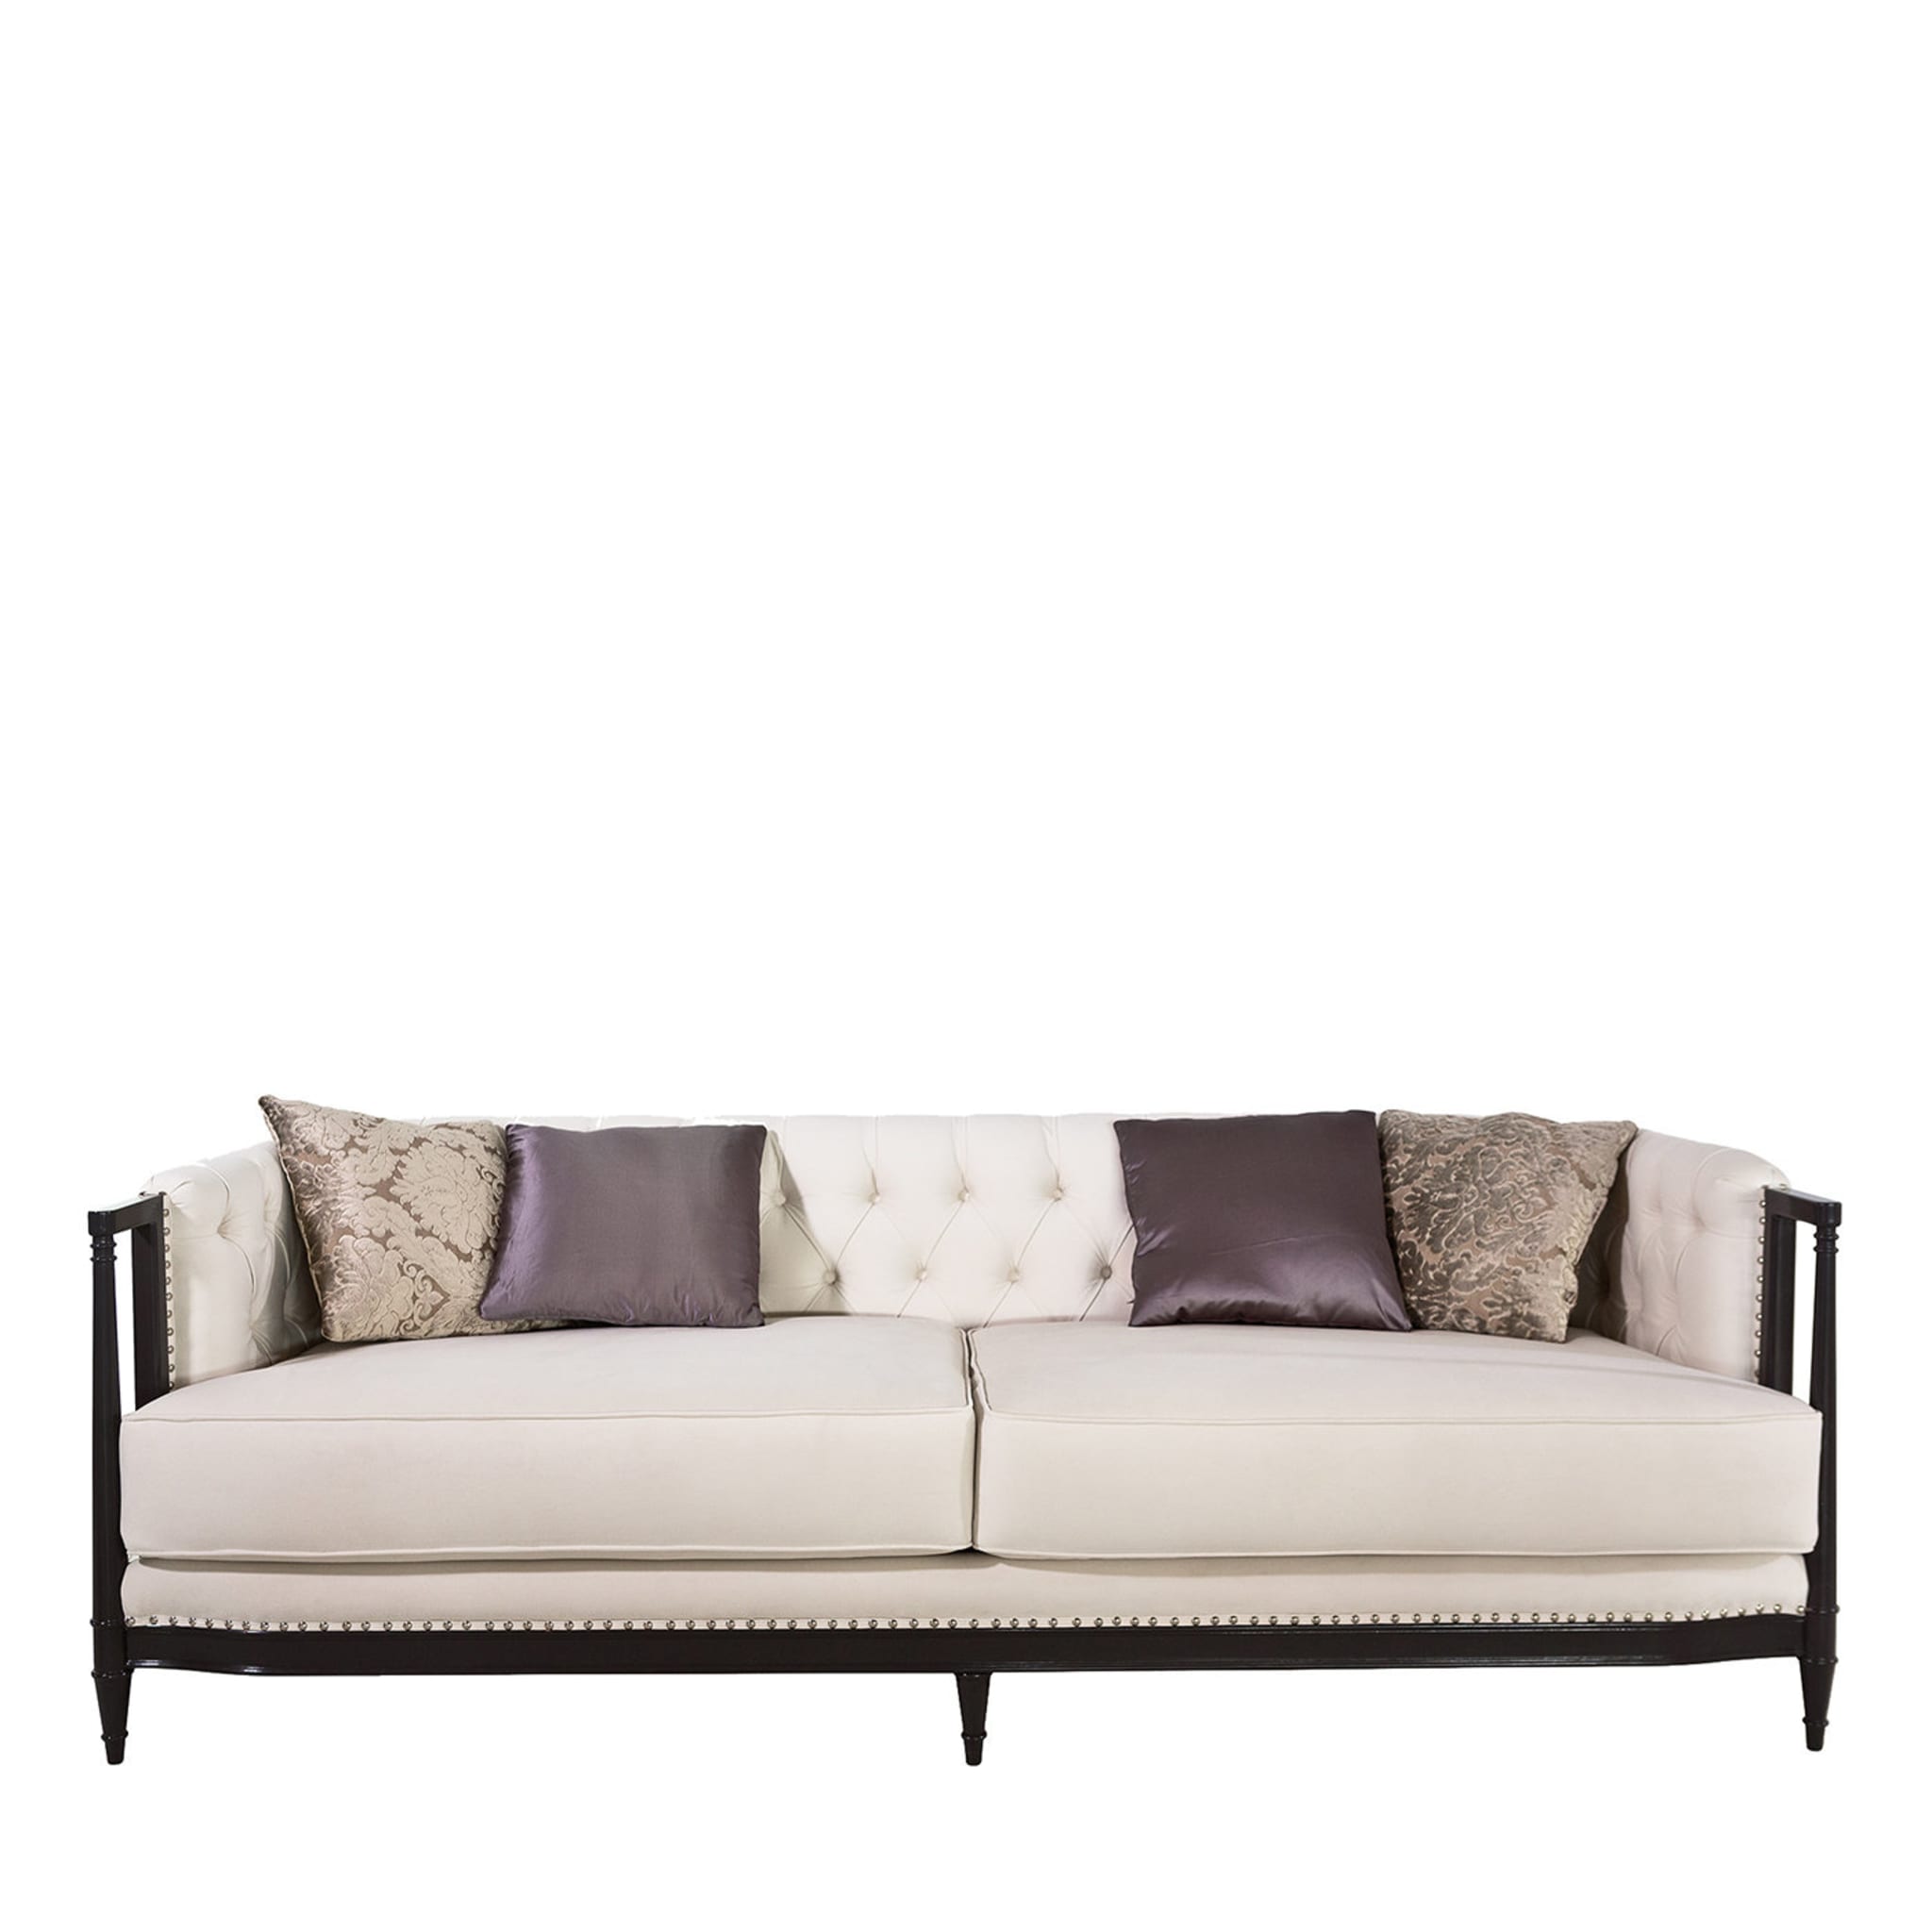 Colonial-Style Beige Sofa - Main view